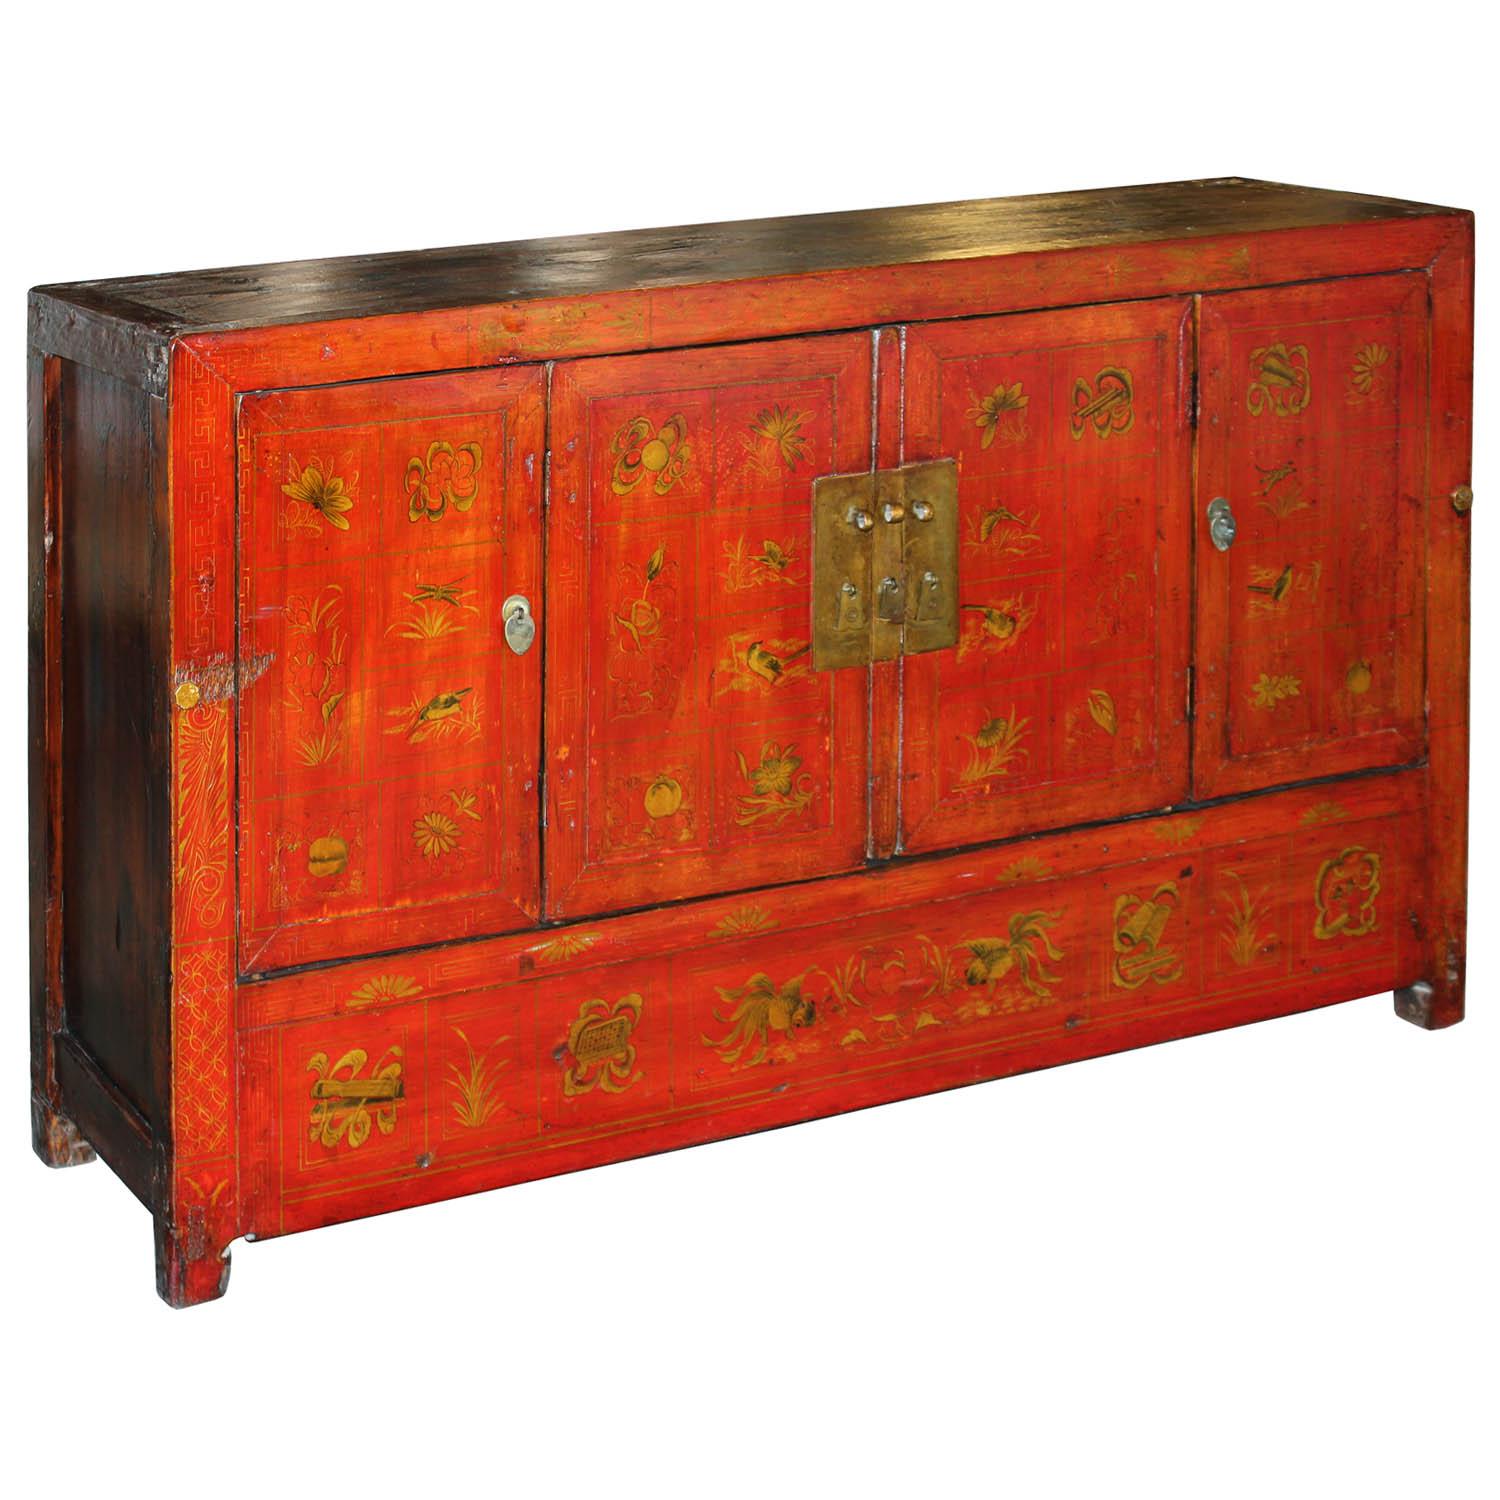 Four-door red lacquered wedding buffet with gold hand painted designs symbolizing prosperity, happiness and good fortune. New interior shelf and hardware. Made in Dongbei, China, circa 1890.